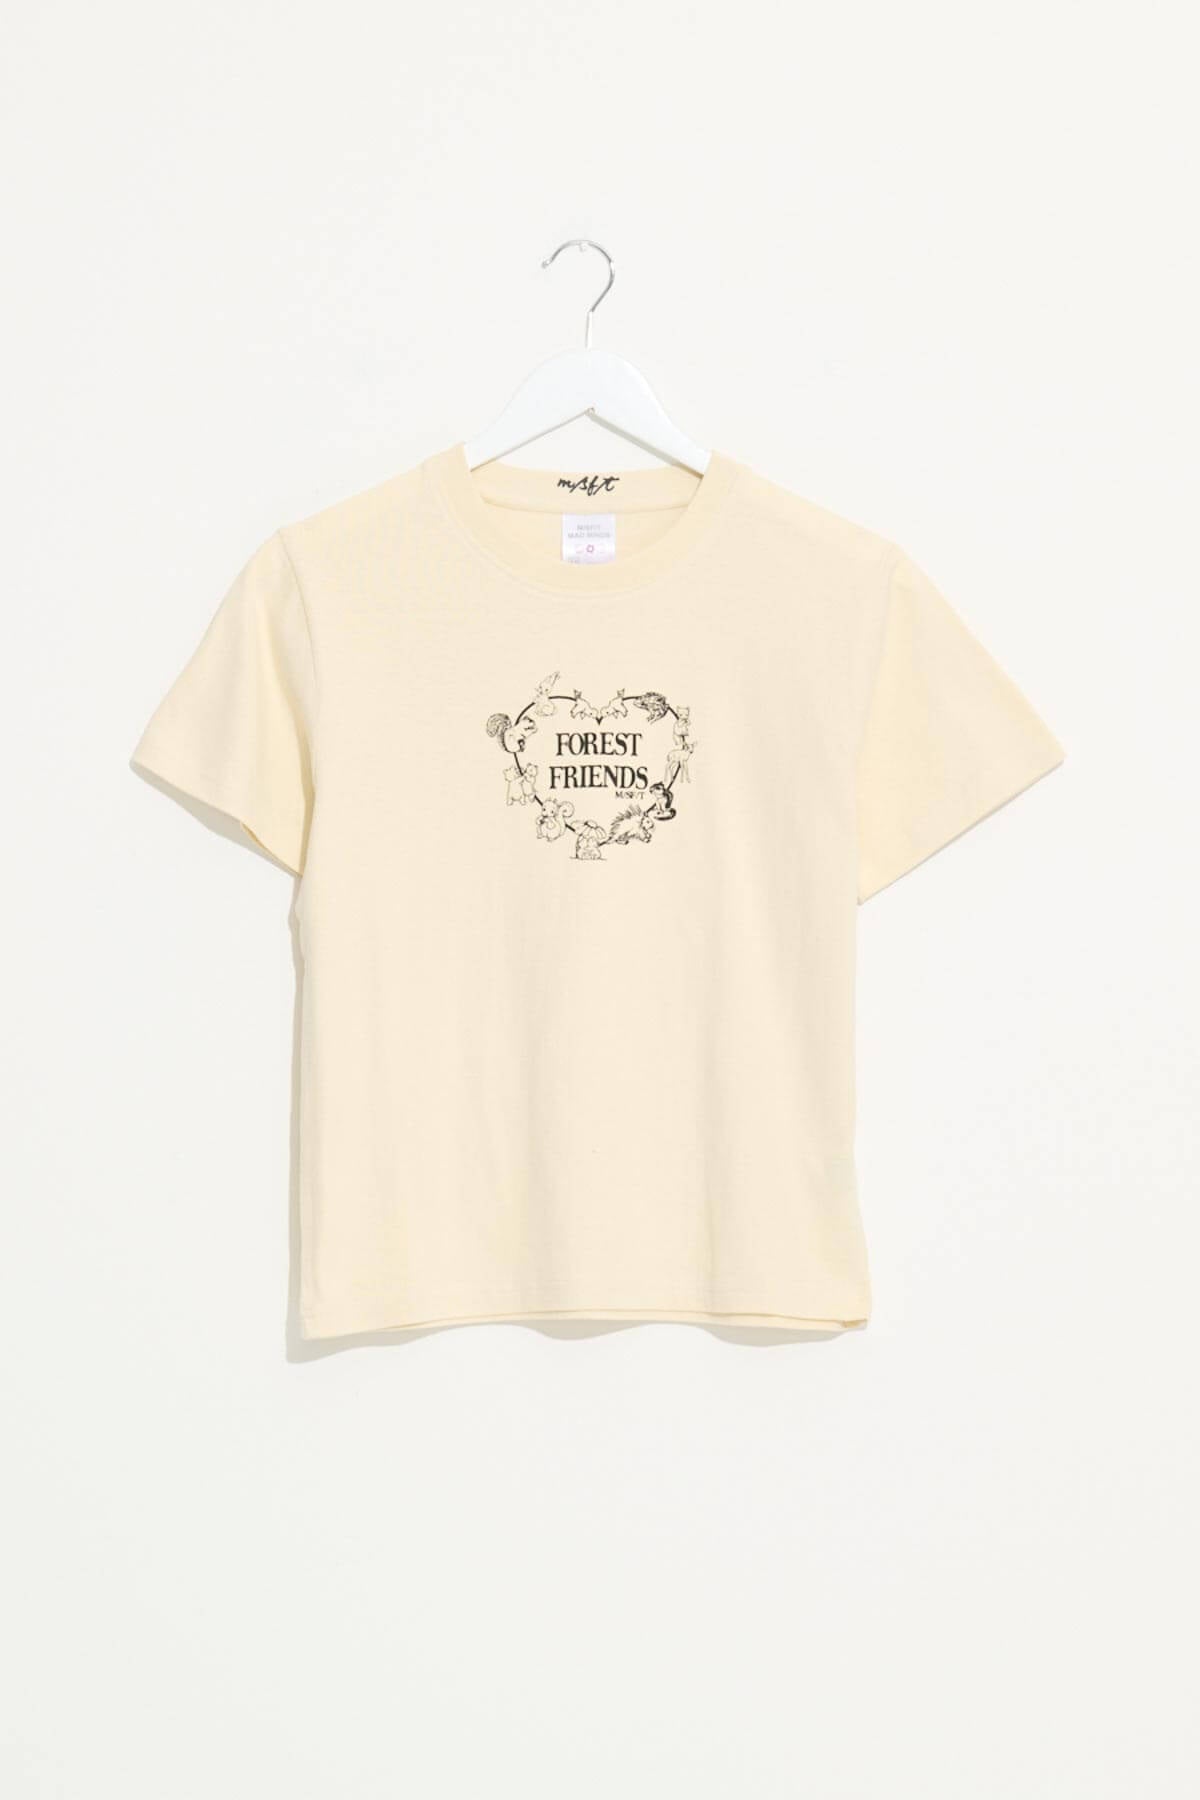 Misfit Shapes - Forest Friends Baby Tee - Cream